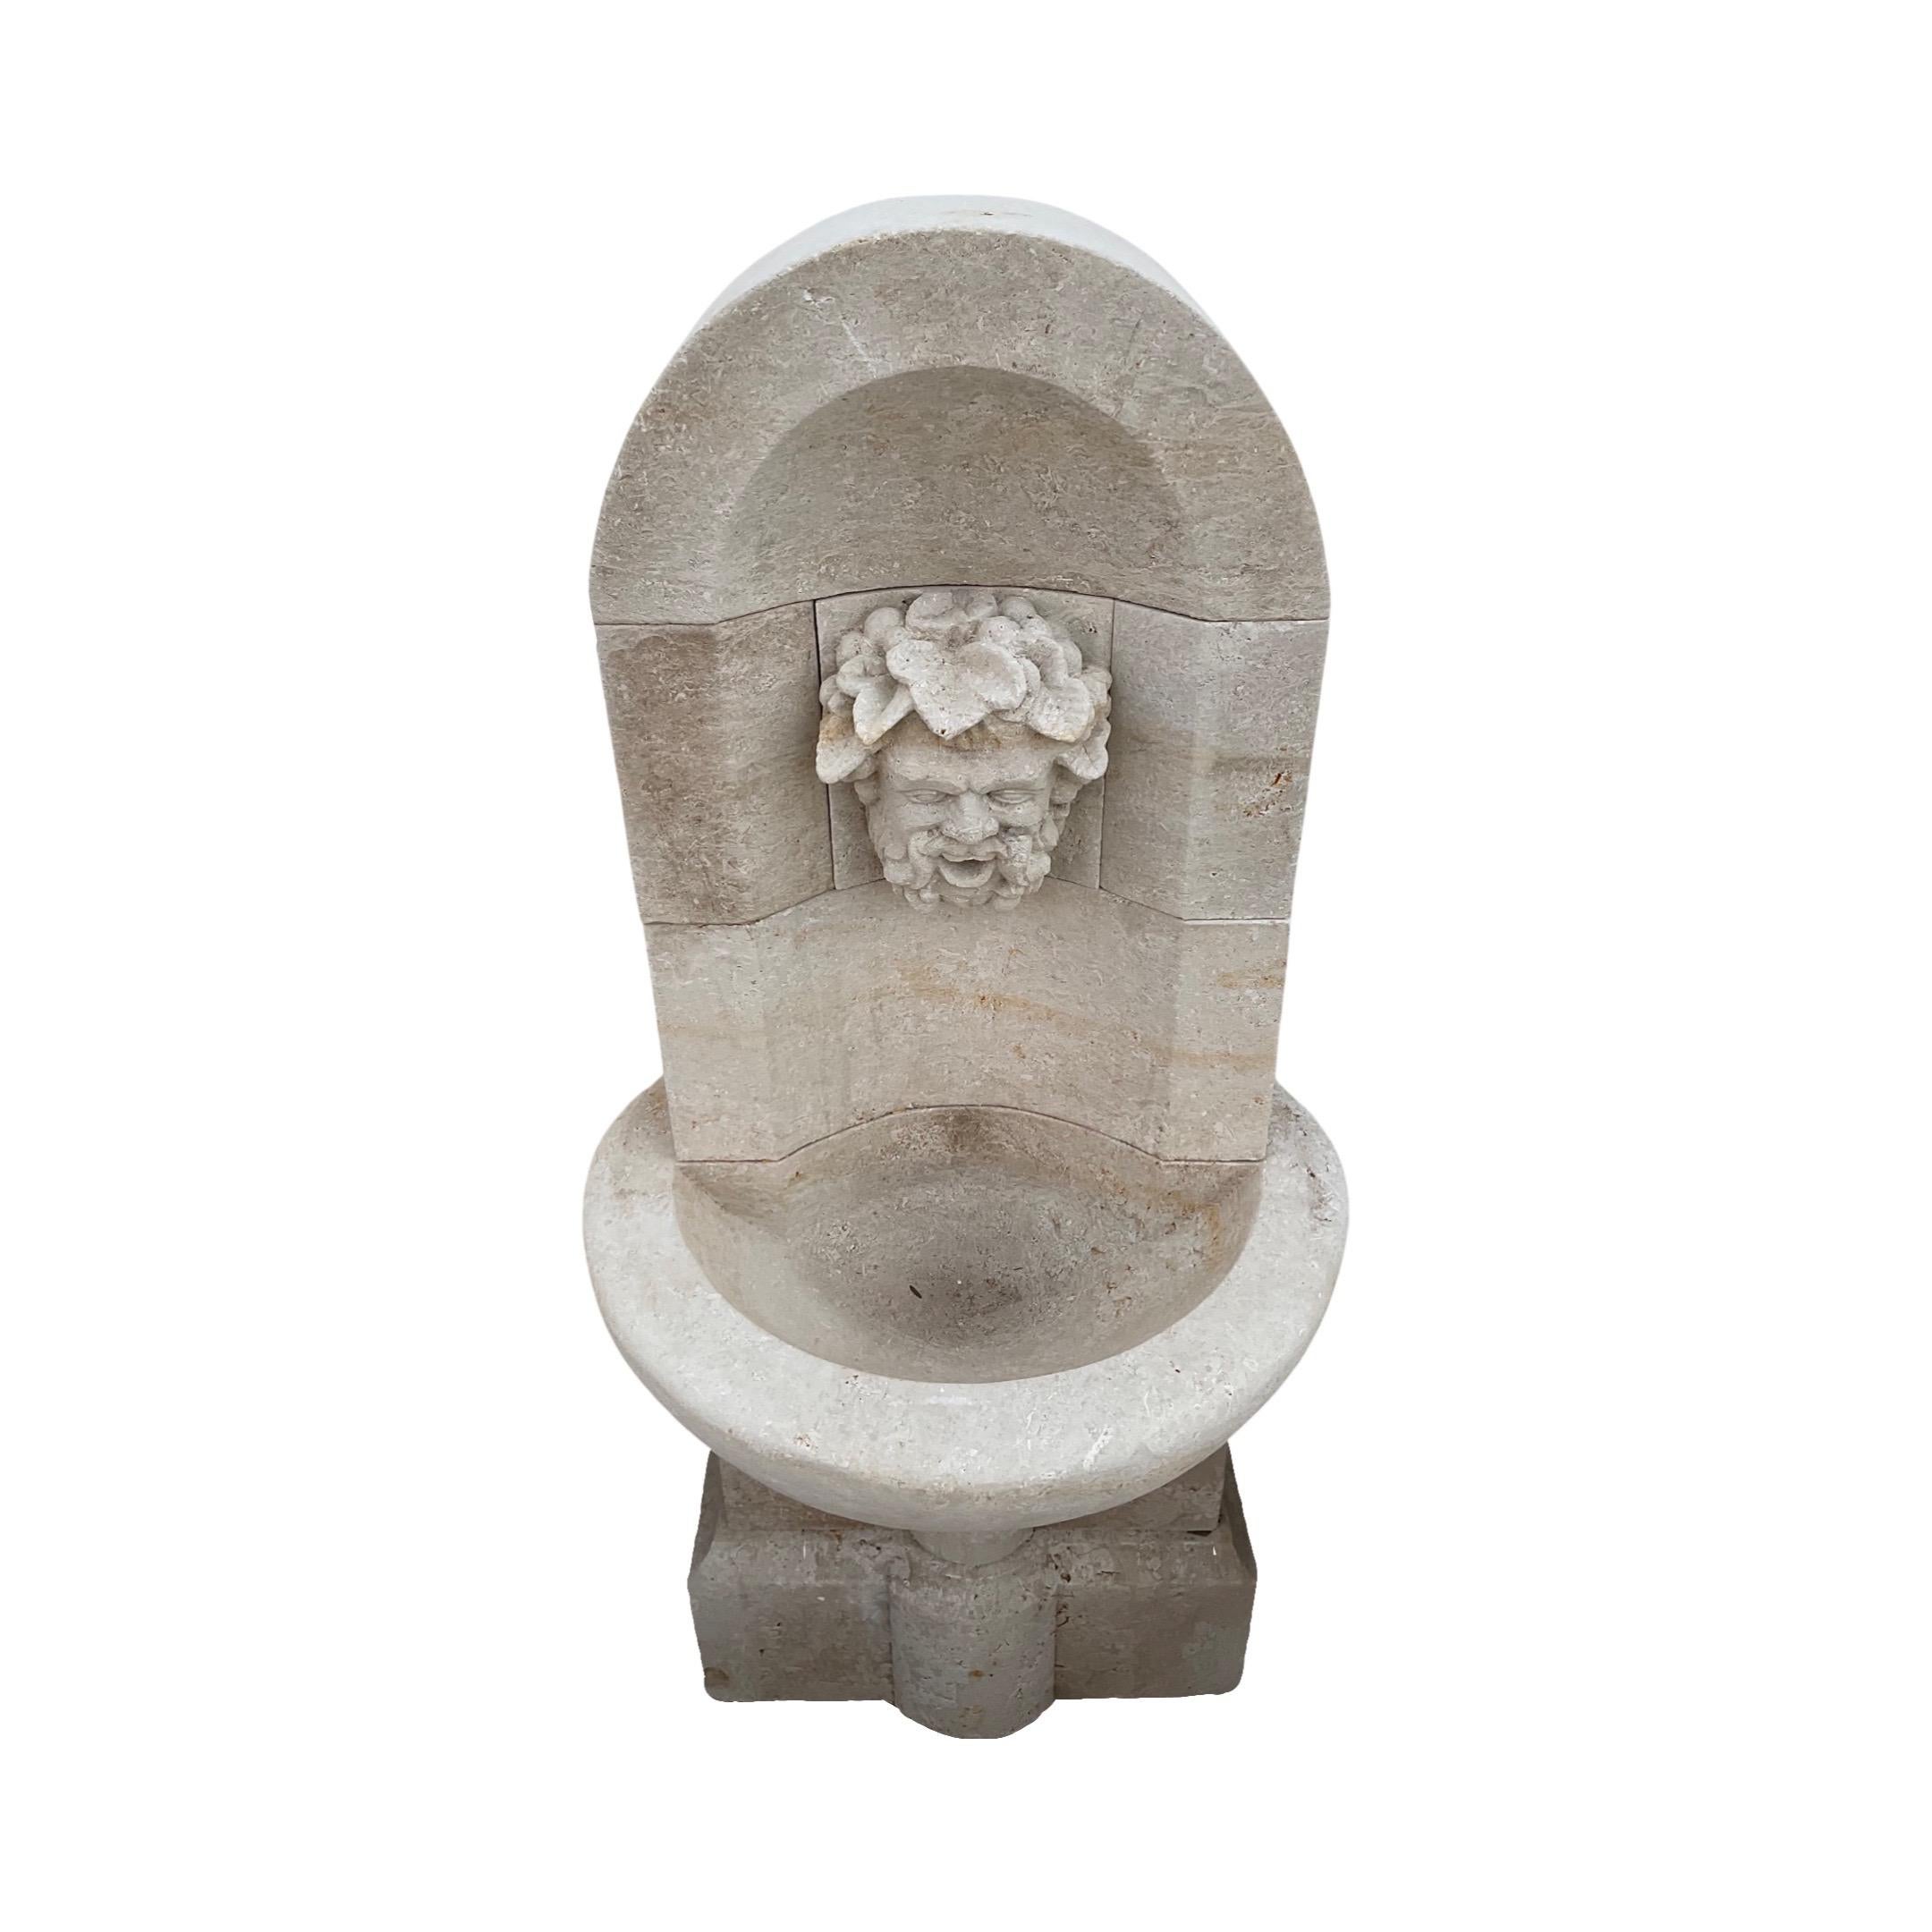 Beautify your outdoor settings with this small, mid-century French Limestone Wall Fountain. Crafted from limestone, this Louis XVI-style fountain features a carved face in the center, serving as a water exit, along with a small basin for water